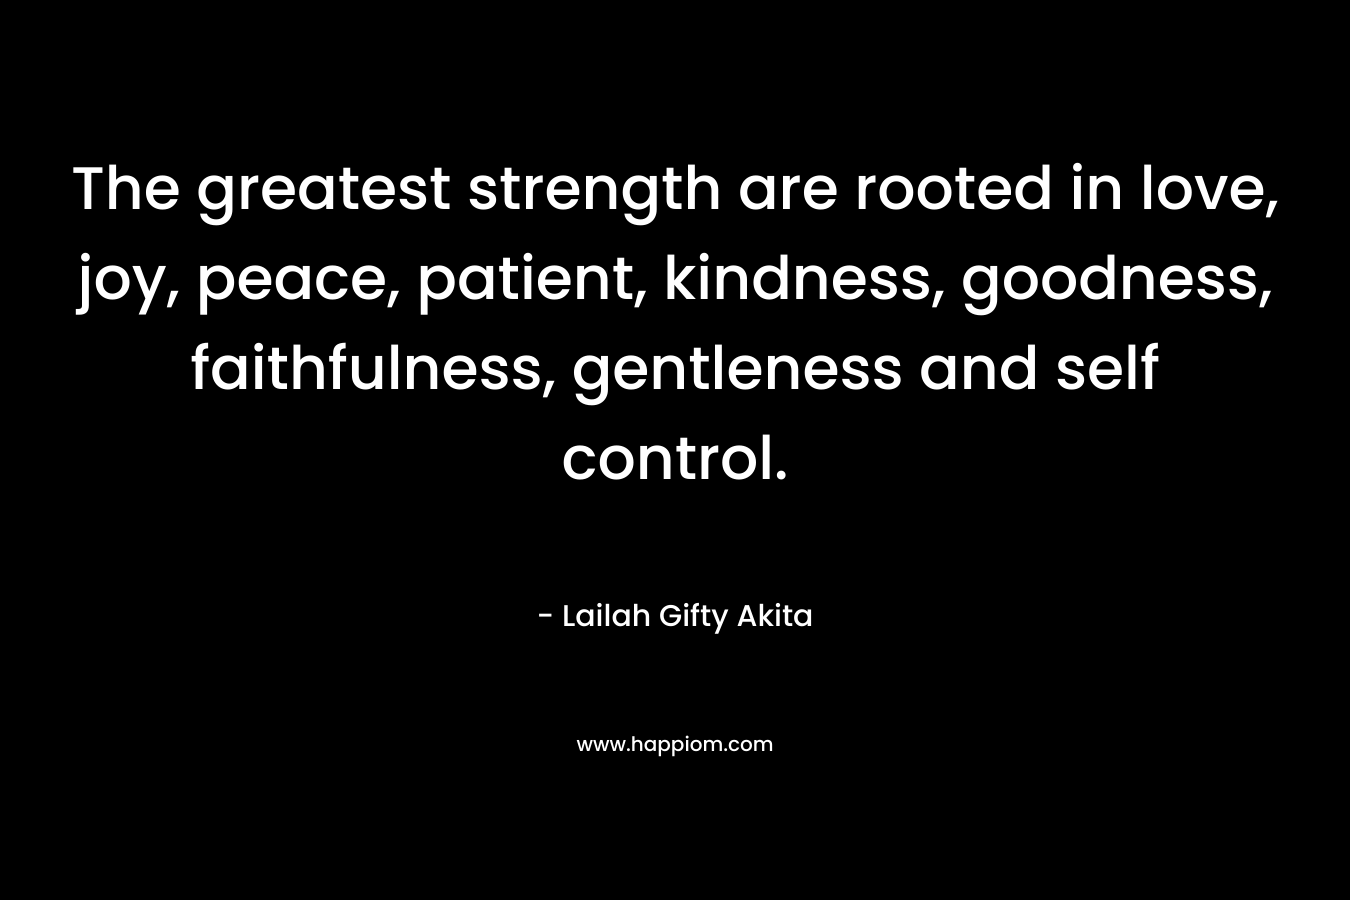 The greatest strength are rooted in love, joy, peace, patient, kindness, goodness, faithfulness, gentleness and self control. – Lailah Gifty Akita